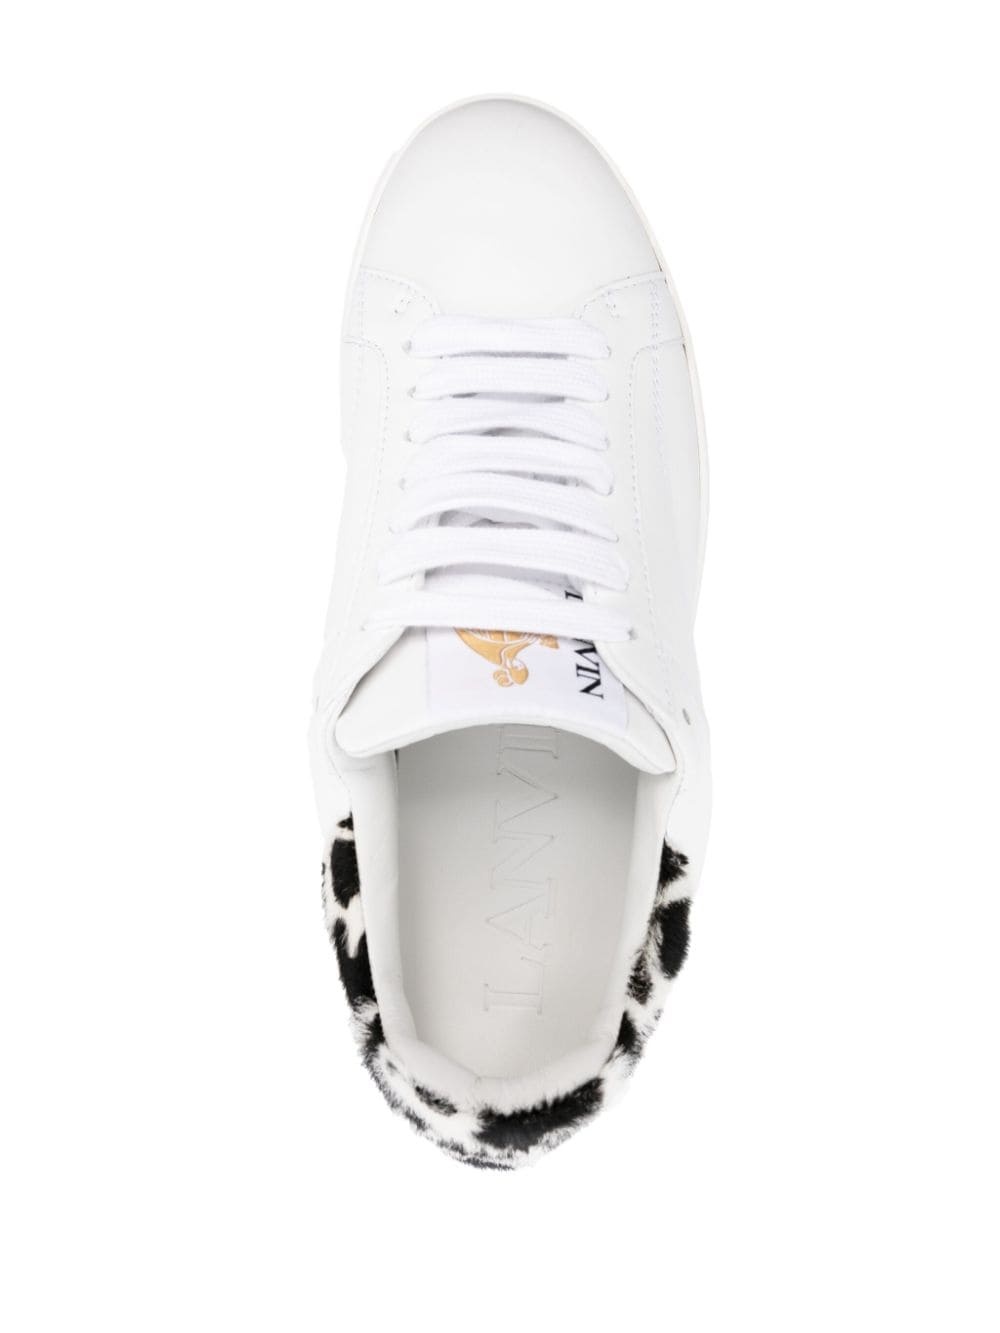 DDB0 leather sneakers - 4